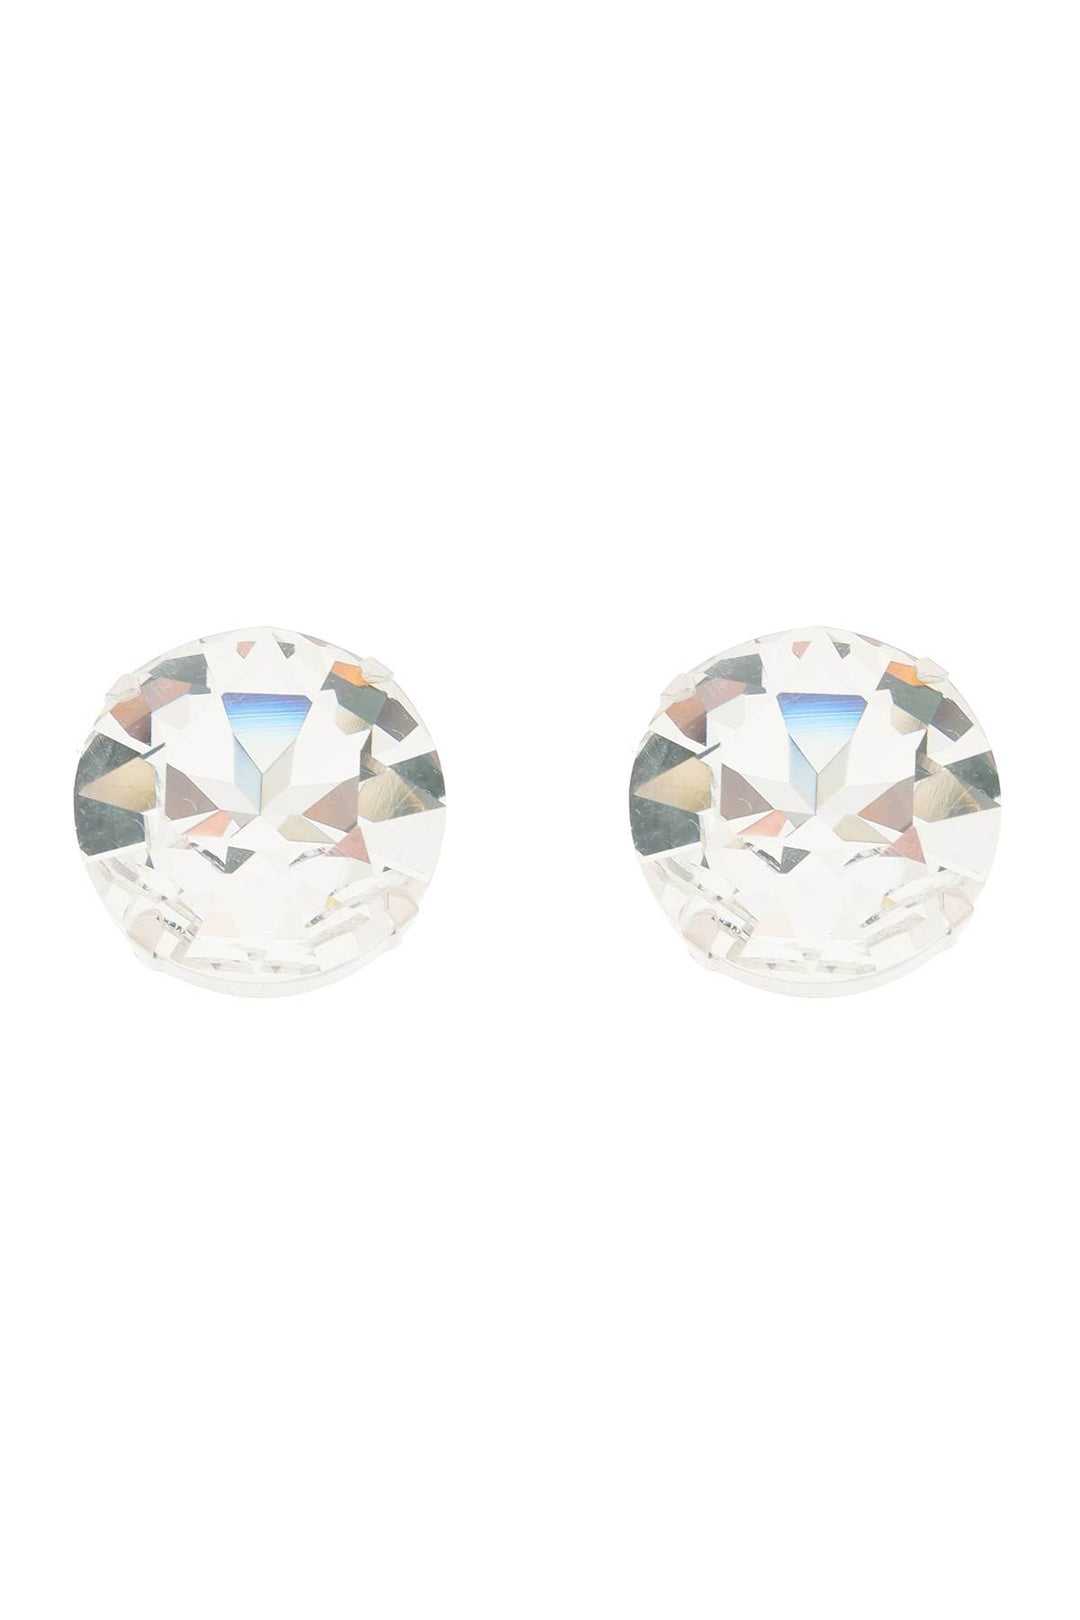 Alessandra Rich Large Crystal Clip On Earrings   Argento